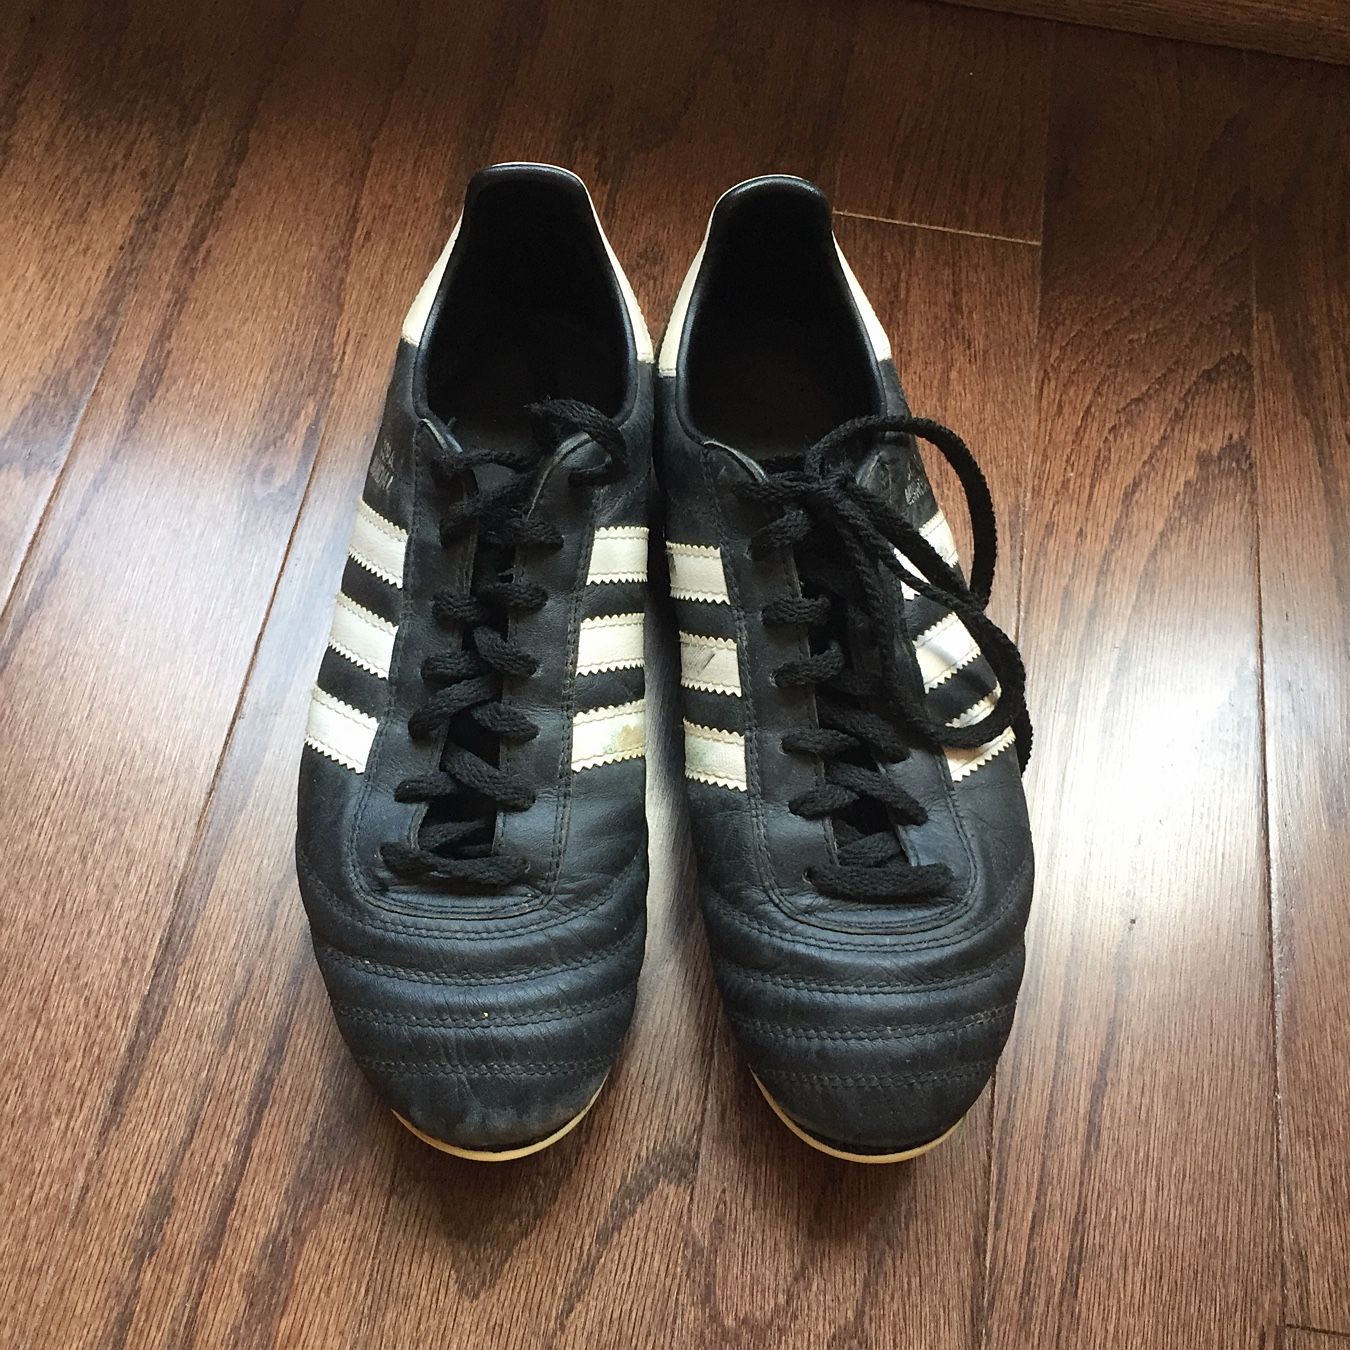 Adidas Soccer/Football Shoes, size 7M